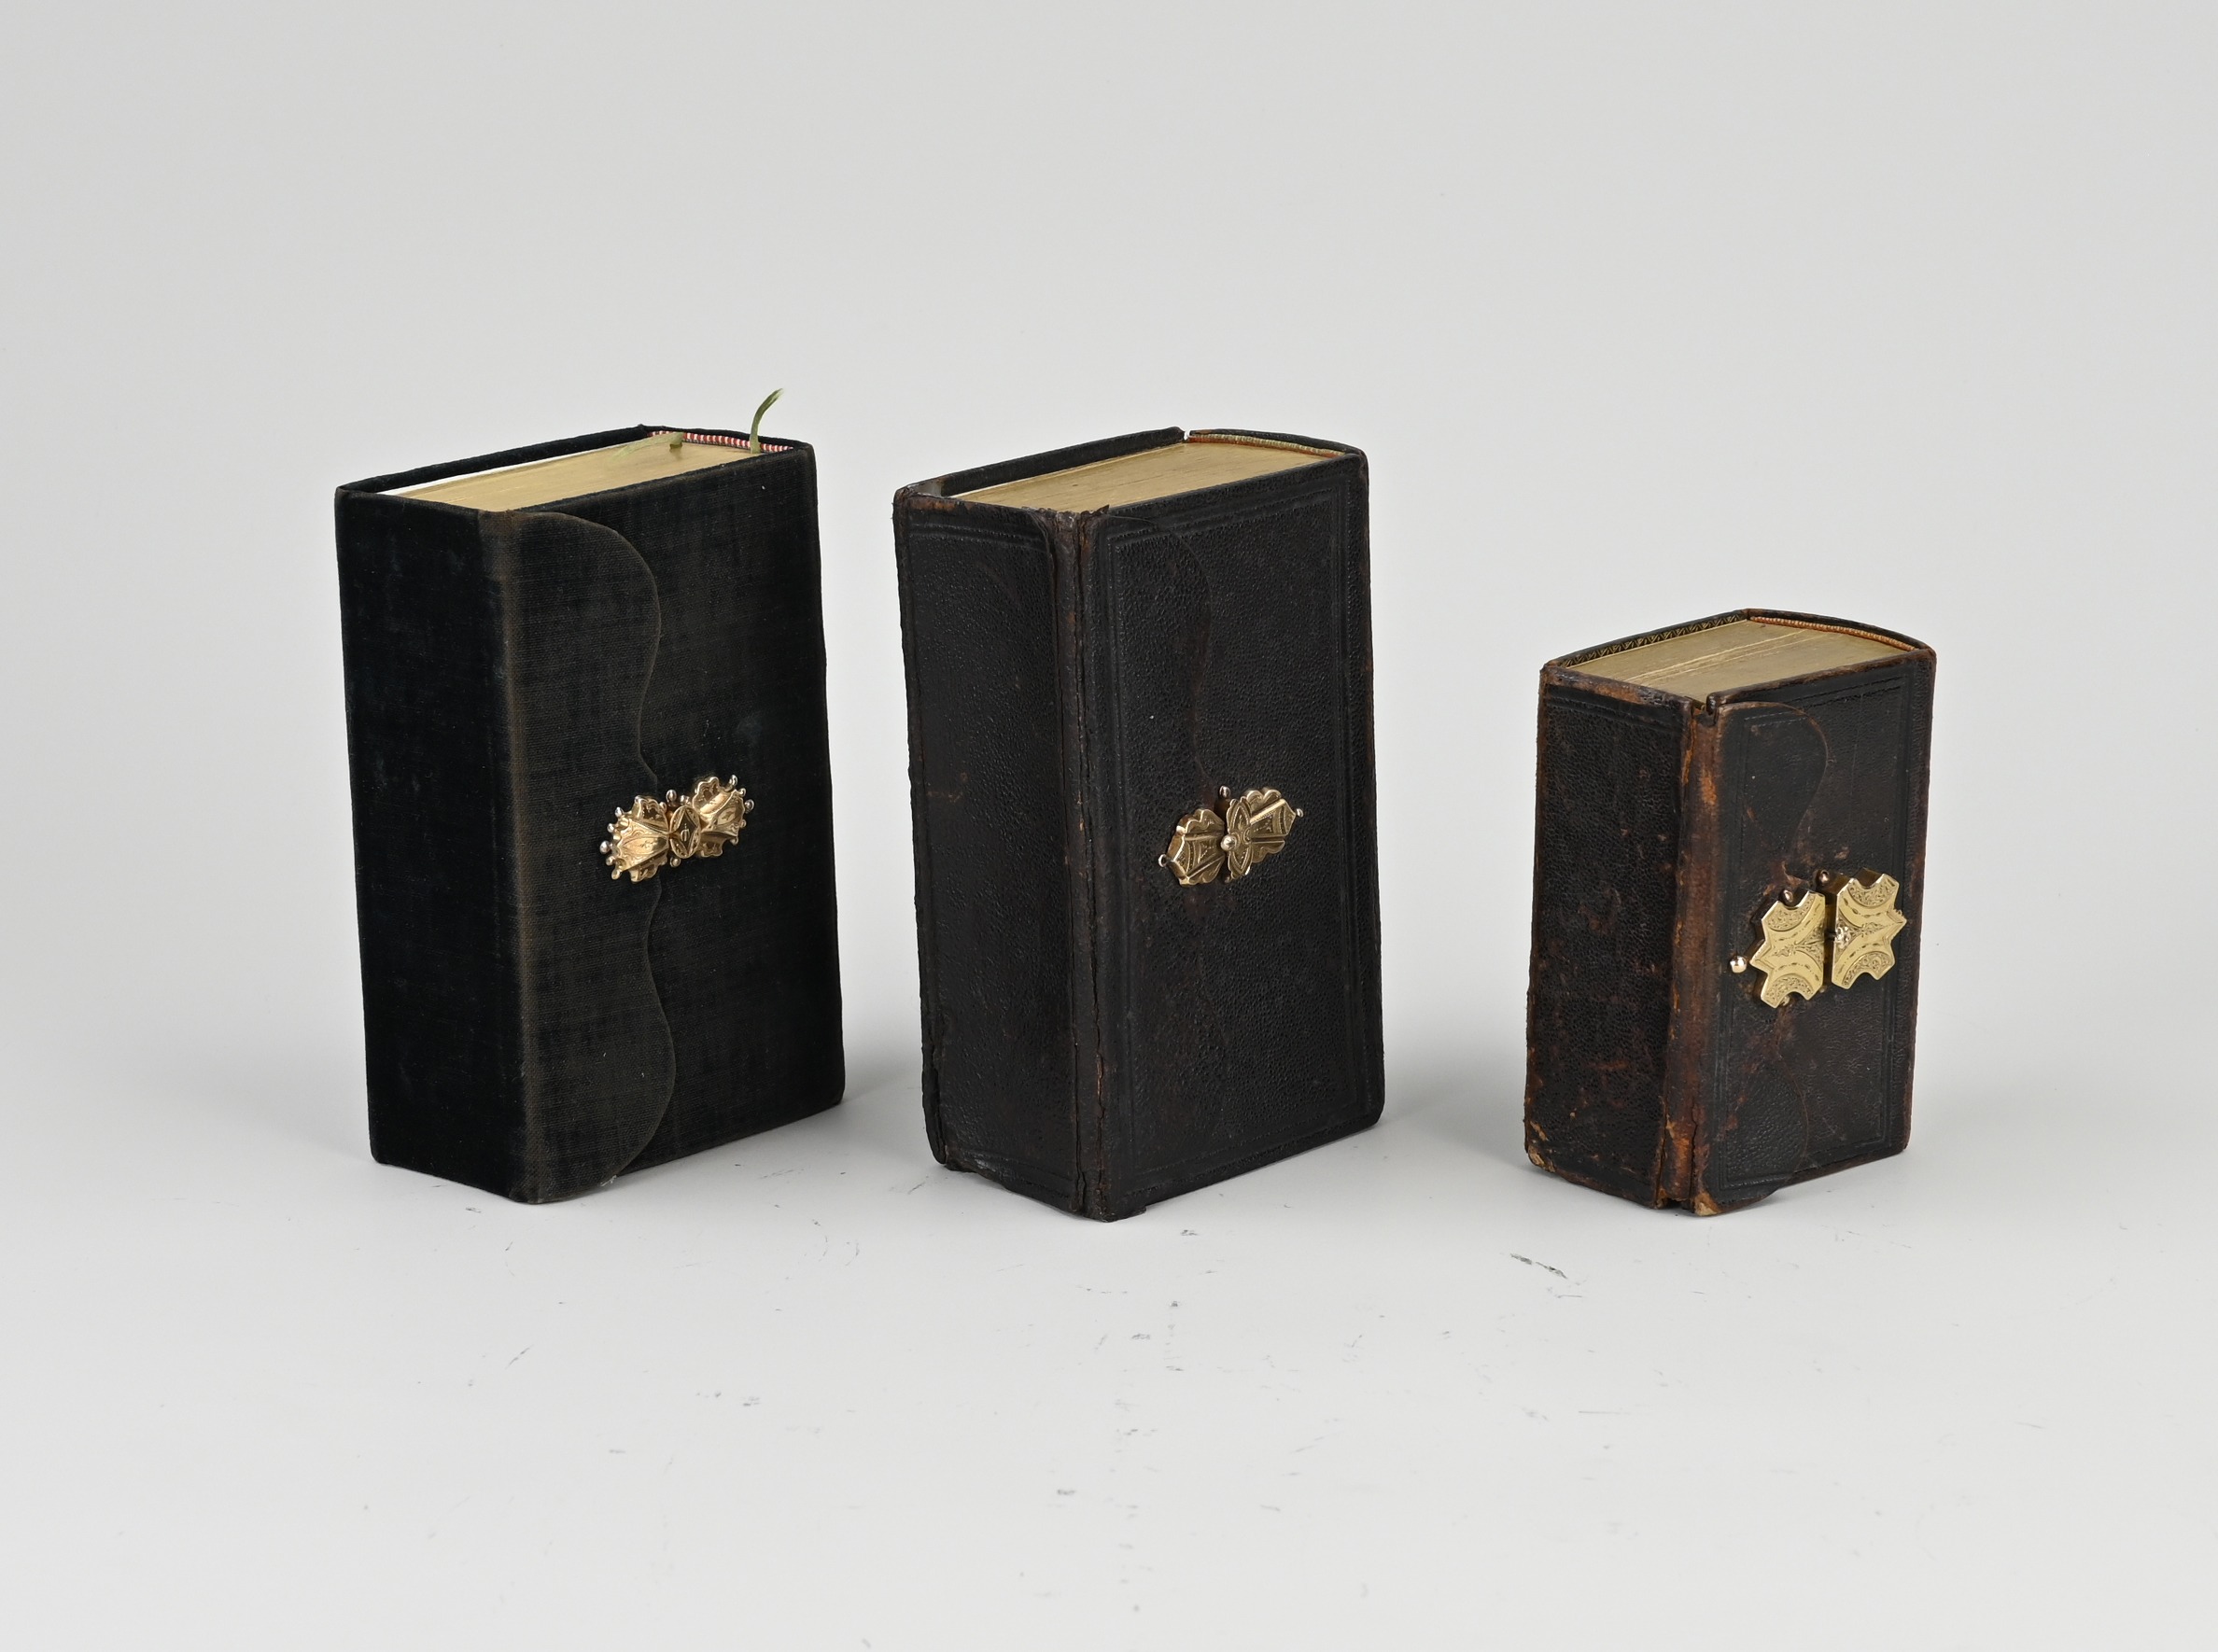 3 Bibles with golden lock